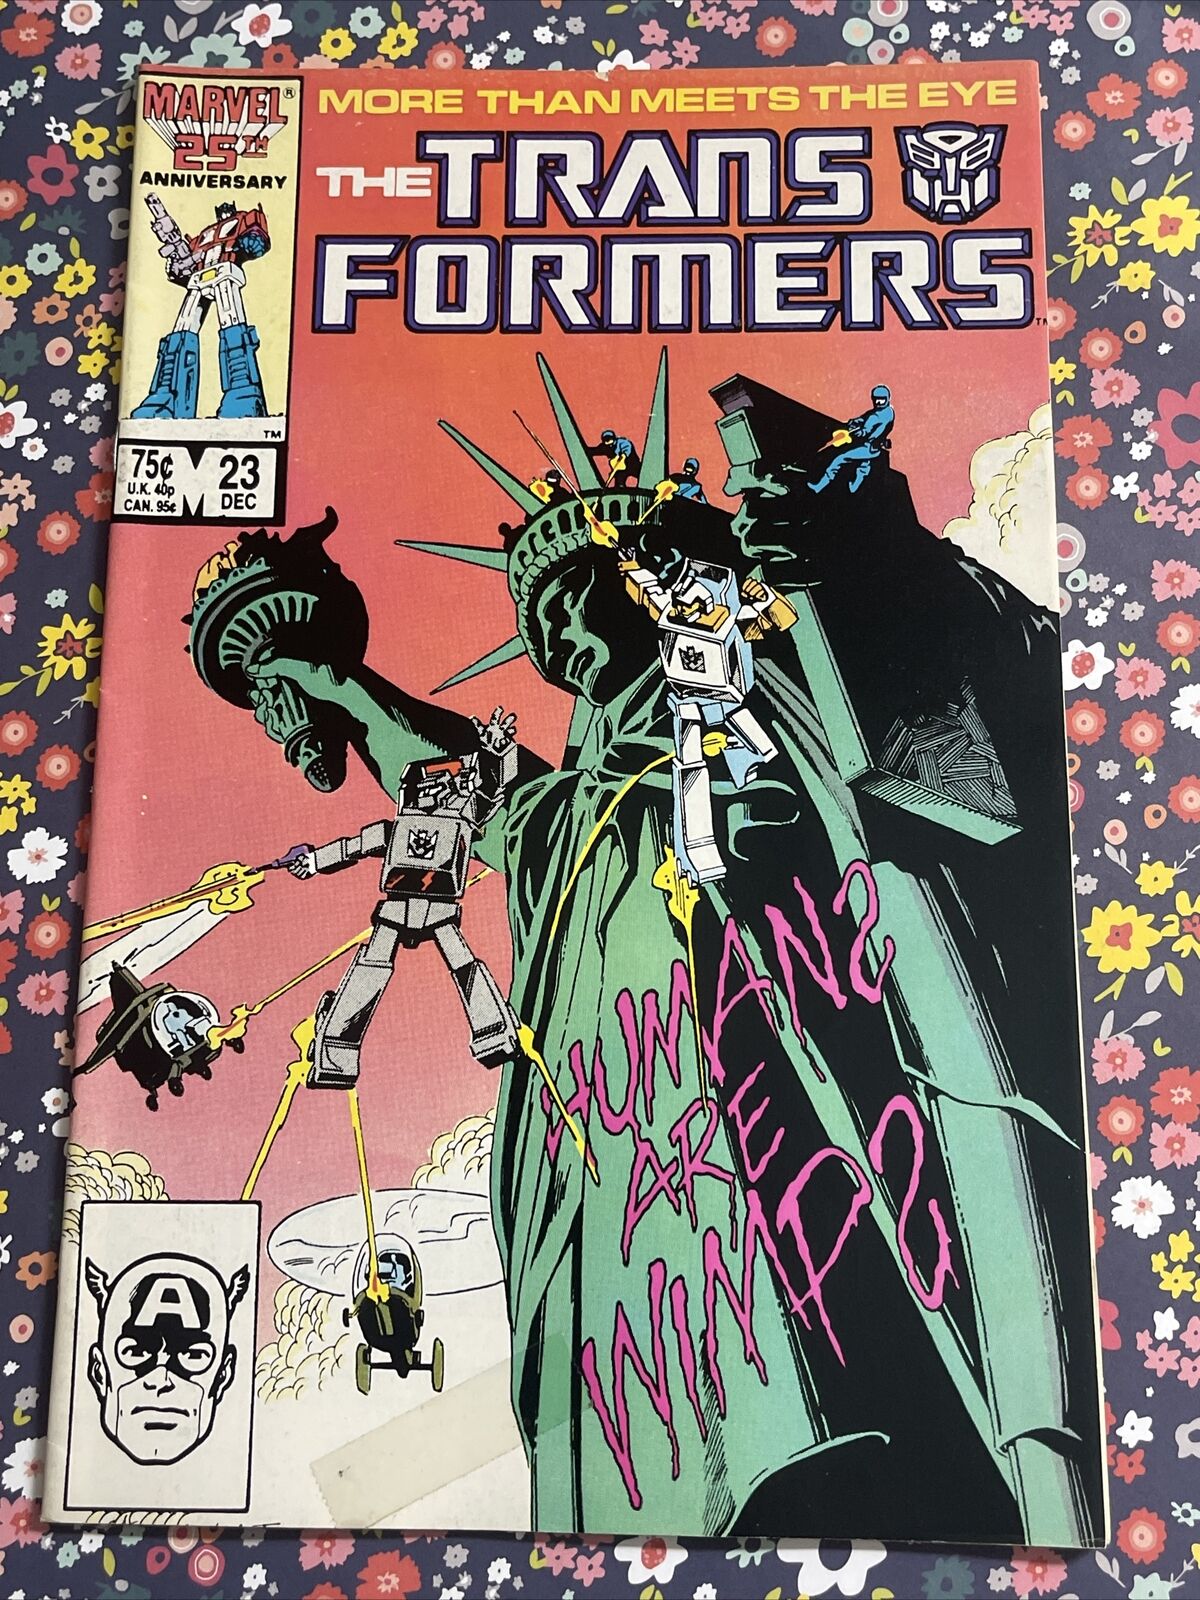 TRANSFORMERS #23 HERB TRIMPE STATUE OF LIBERTY HUMANS ARE WIMPS 1986 perlin